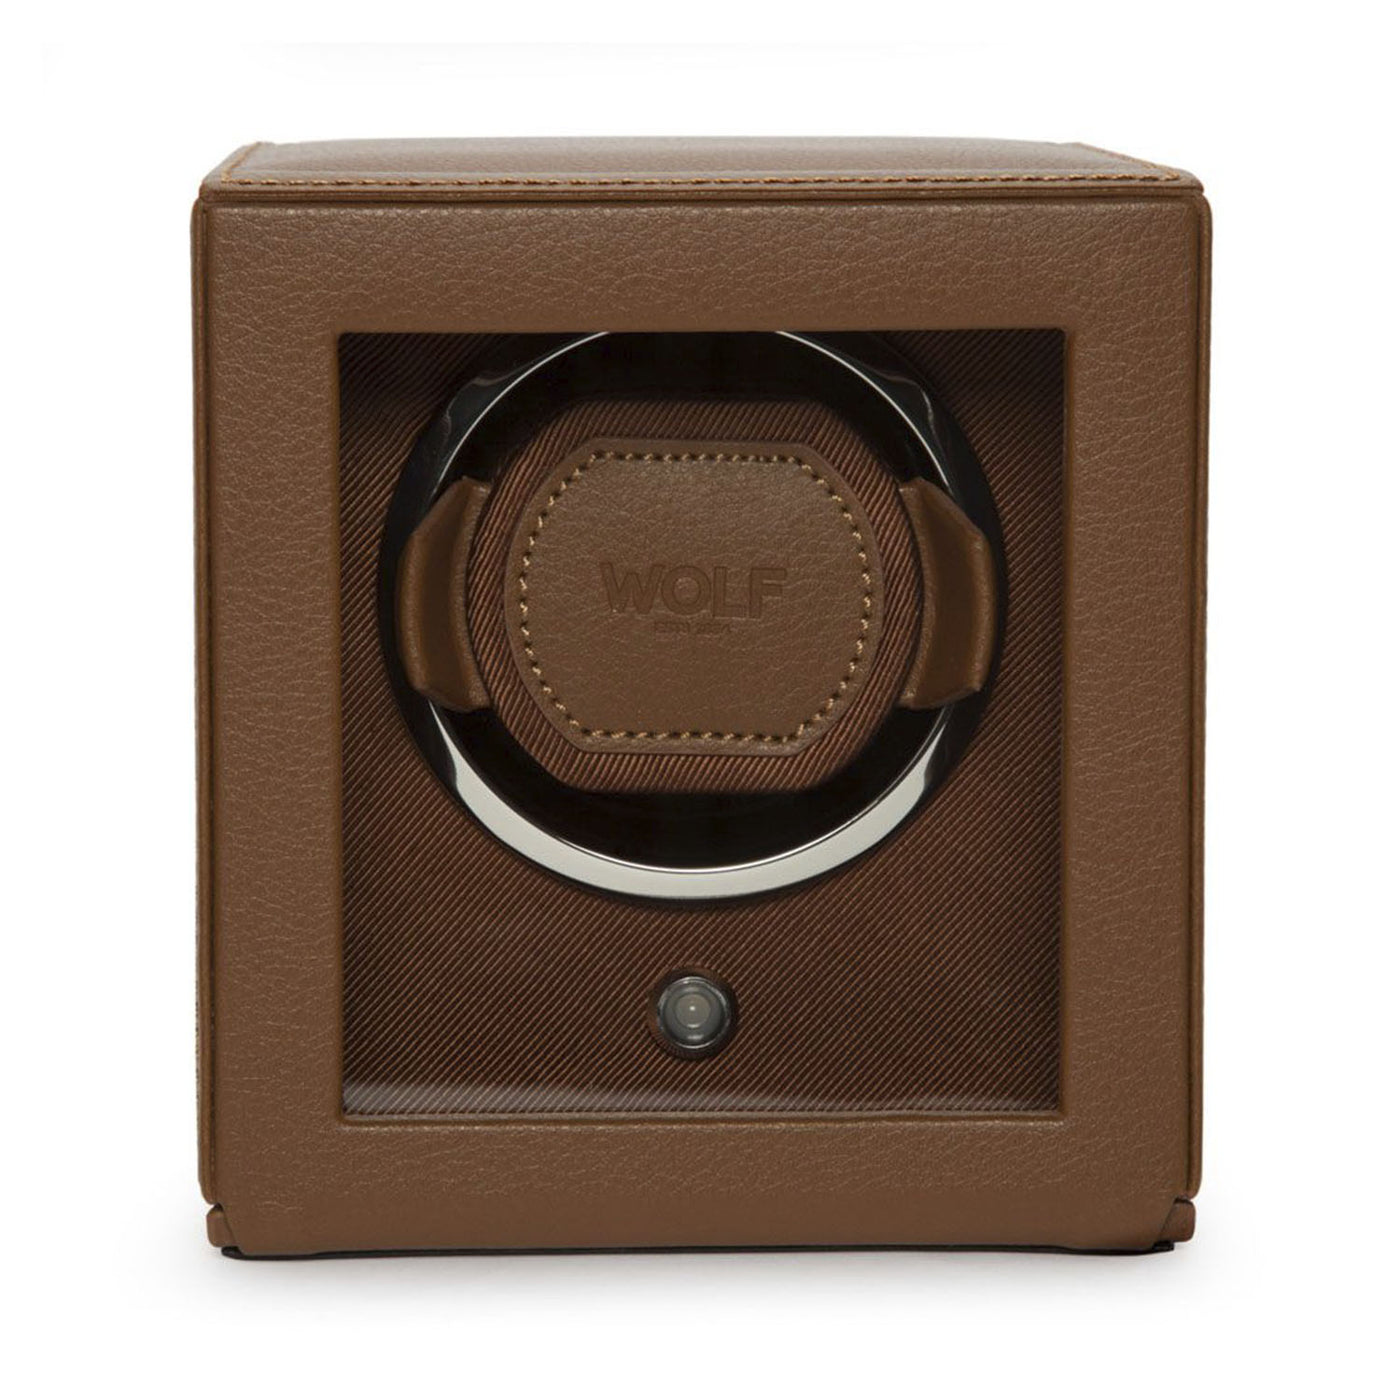 Wolf 1834 Cub Single Watch Winder with cover – 461127